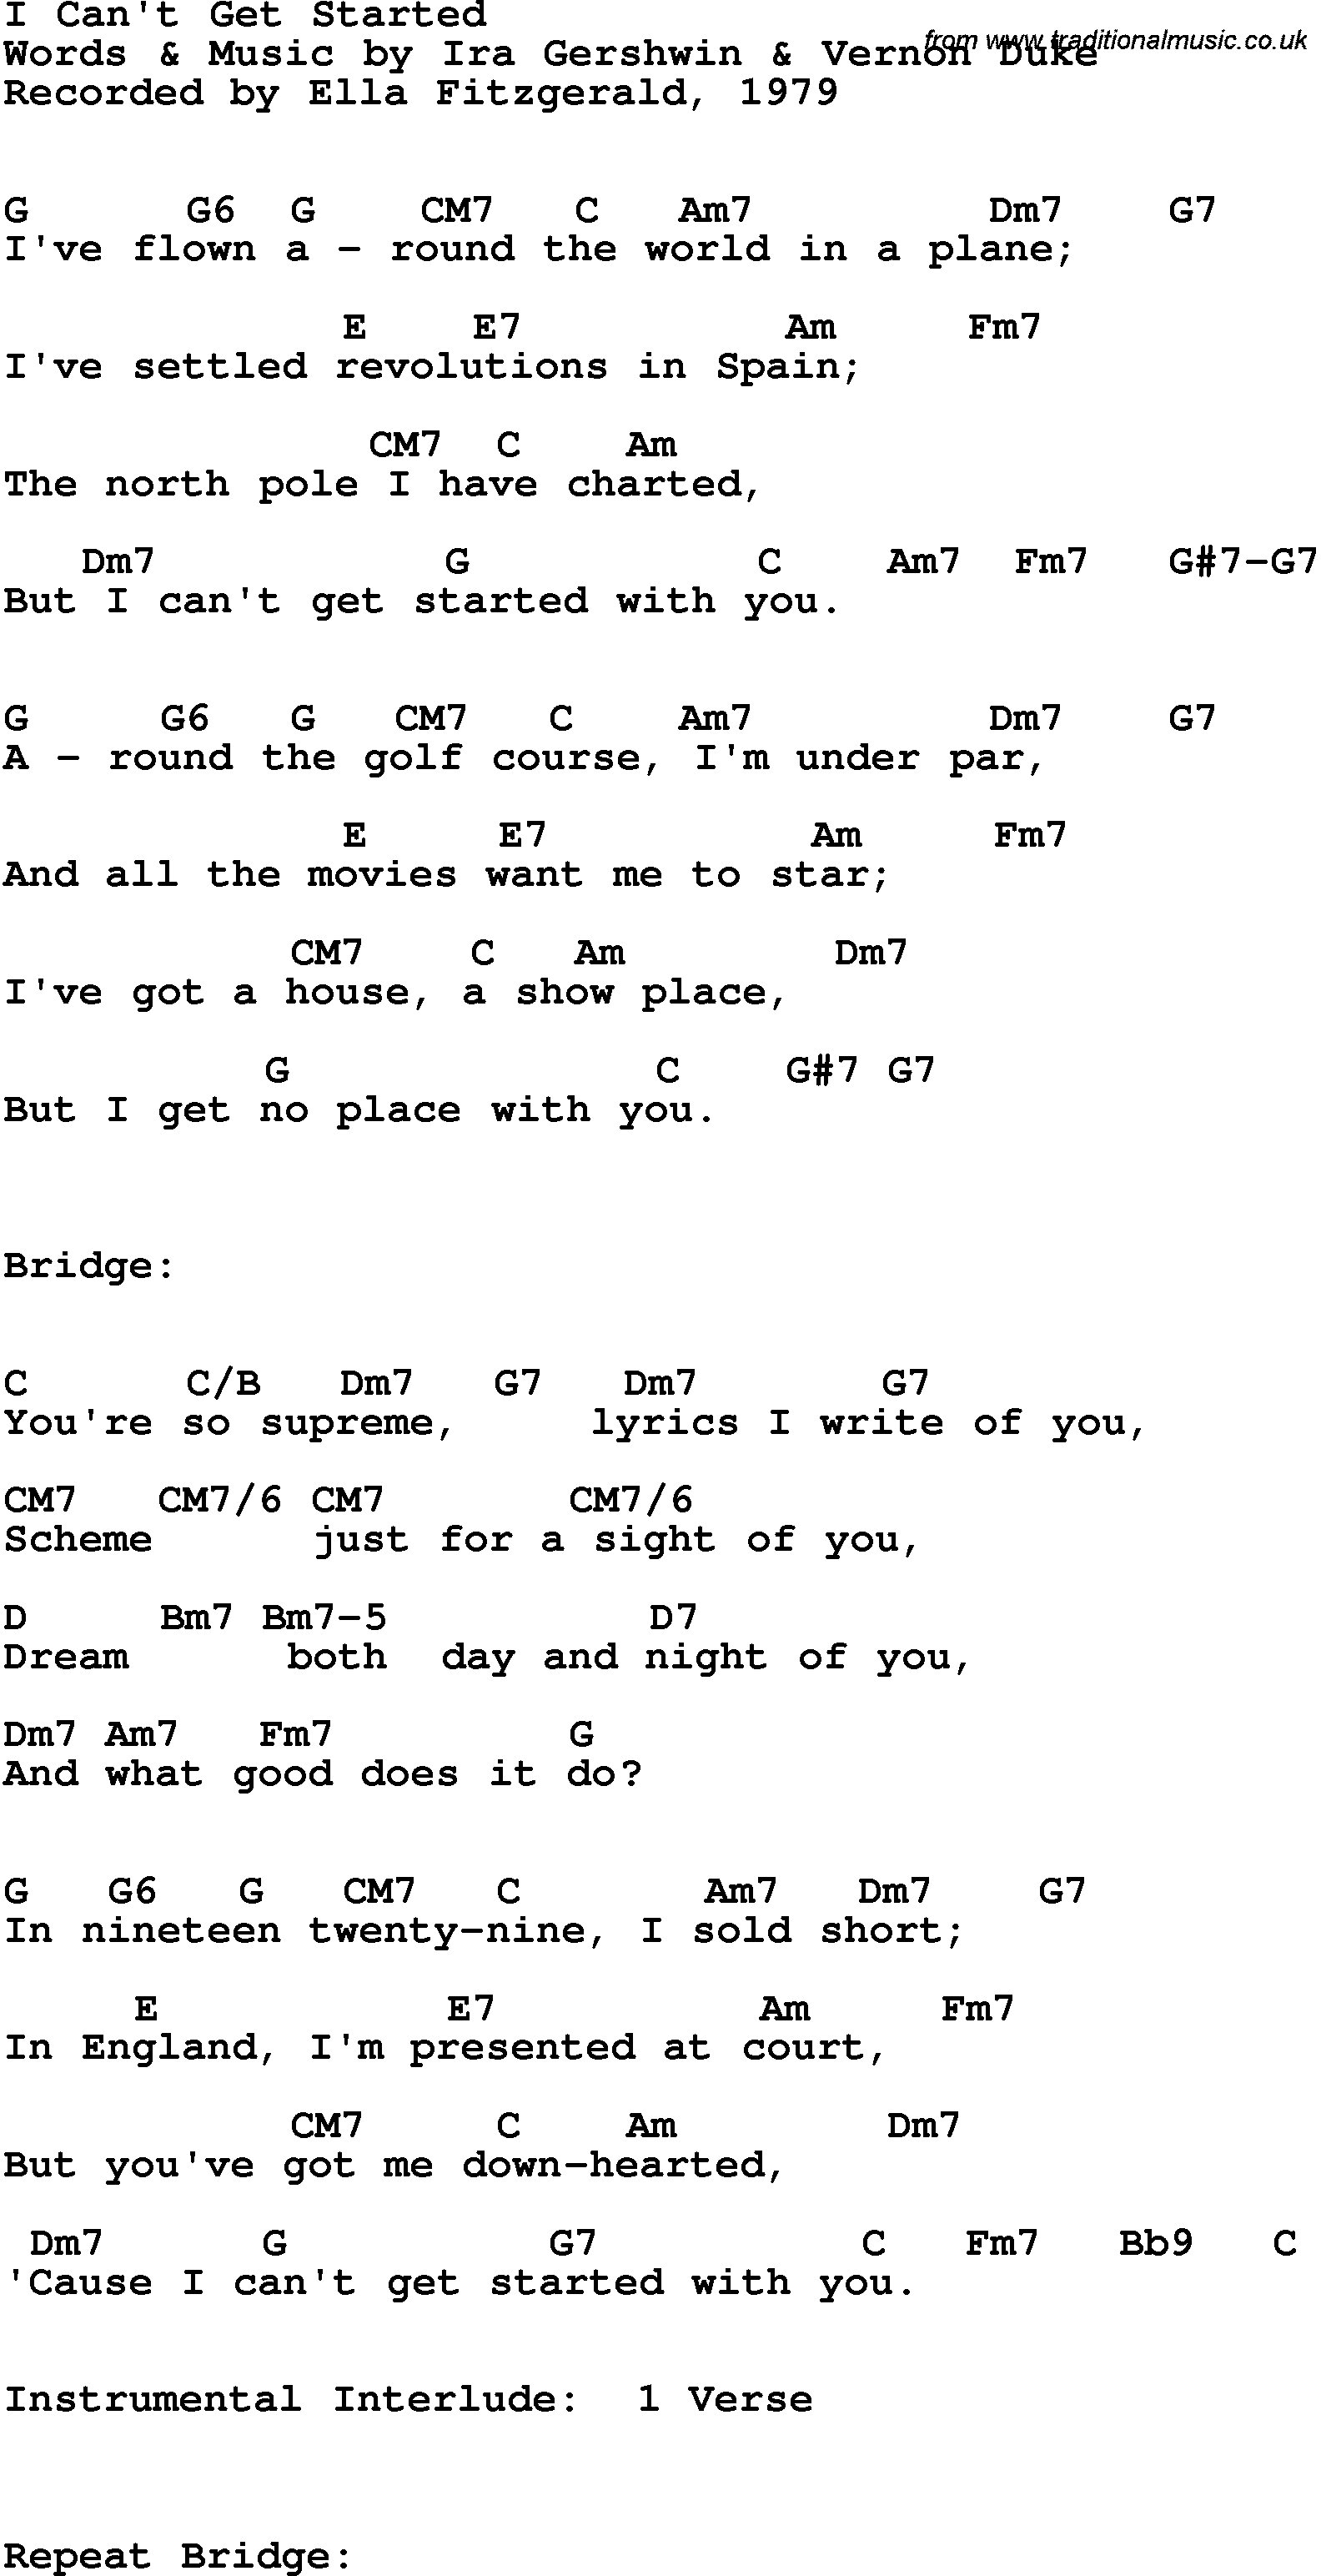 Song Lyrics with guitar chords for I Can't Get Started - Ella Fitzgerald, 1979